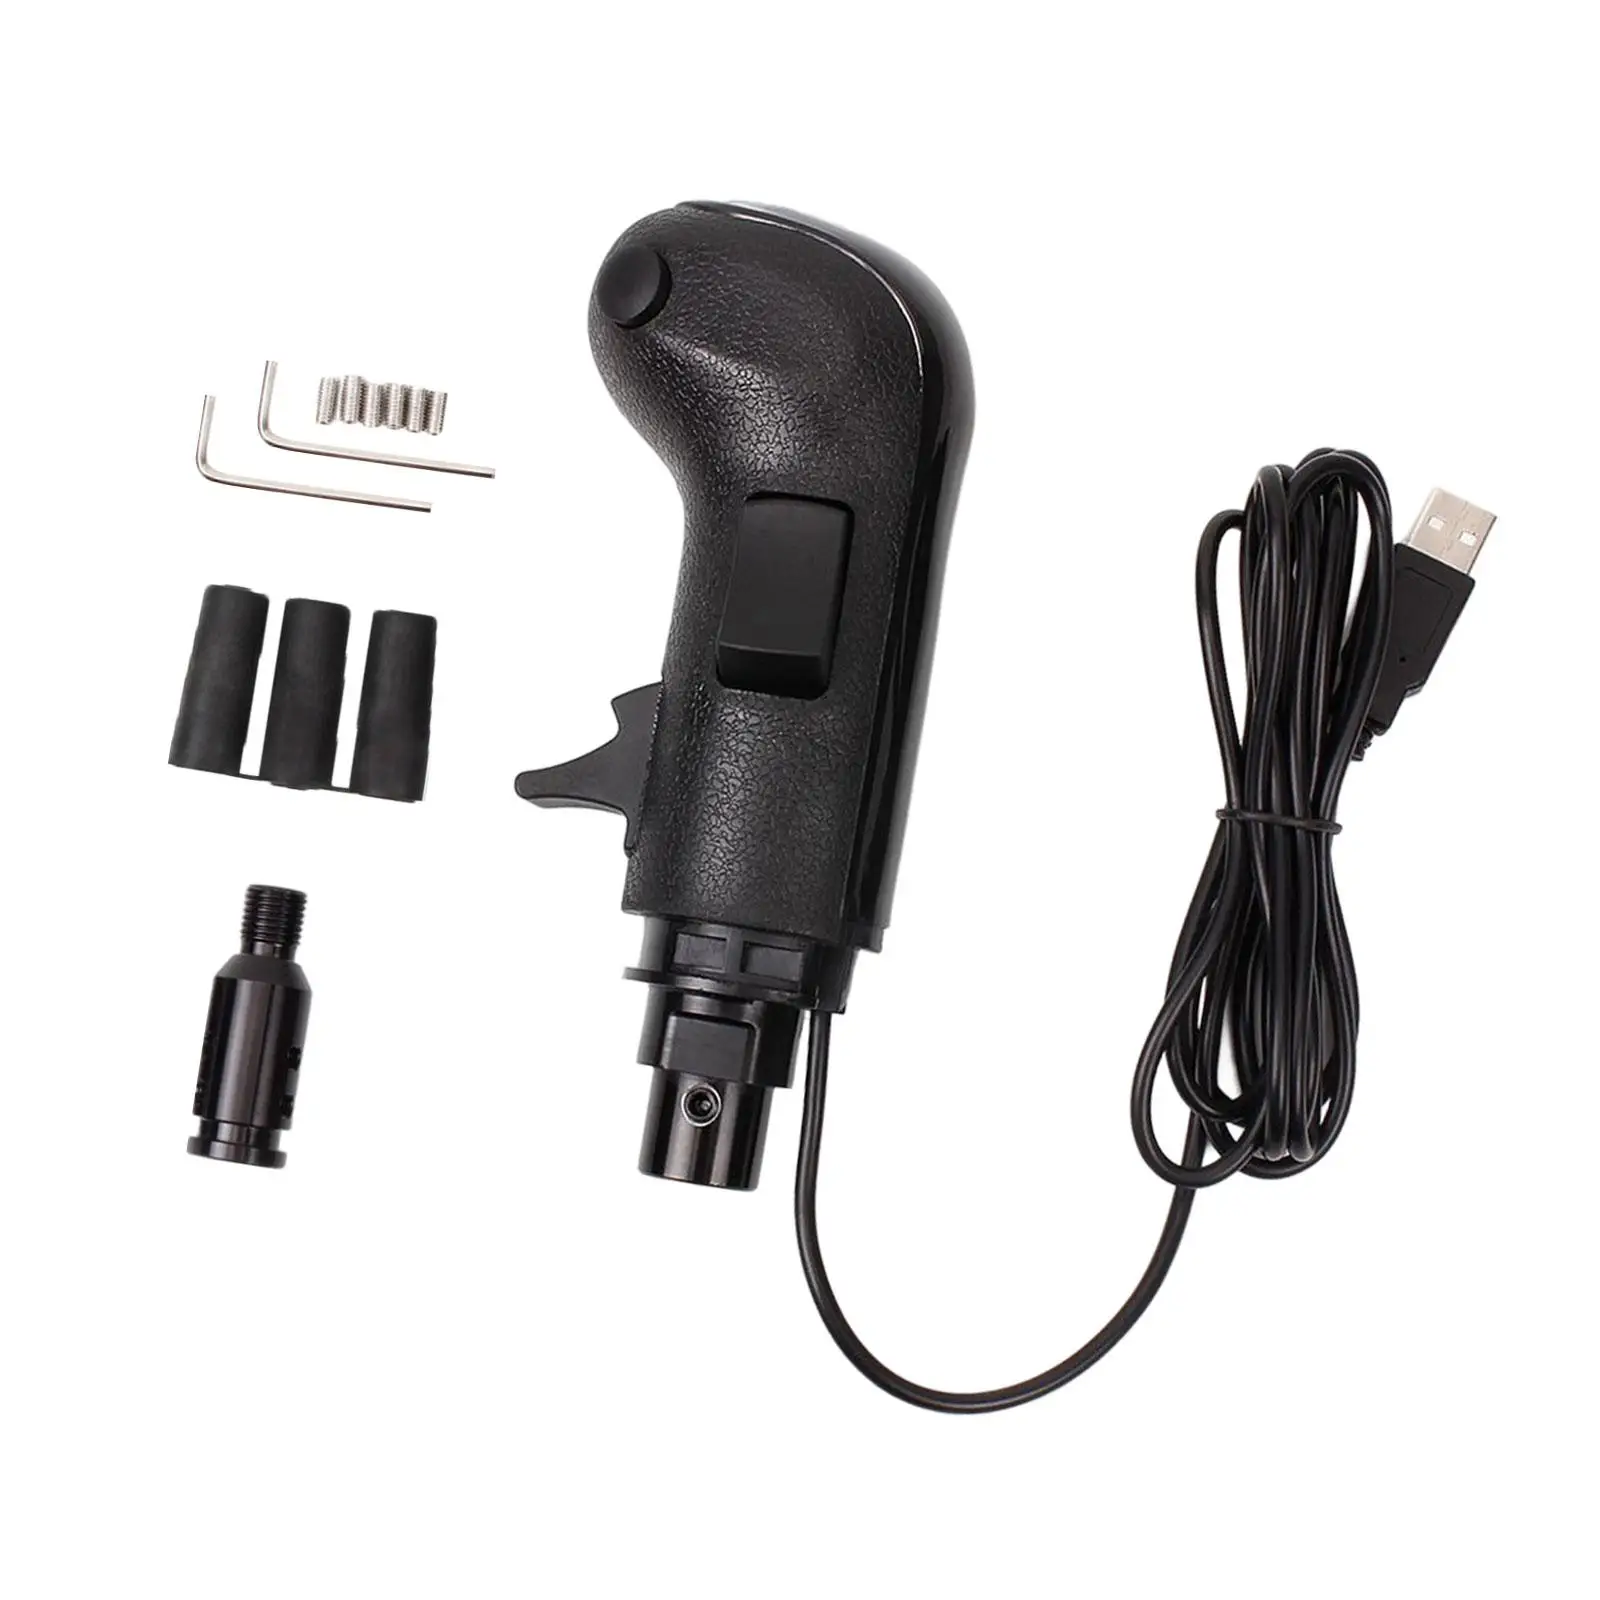 USB Gear Shift Knob Easy to Install ATS Ets2 Games USB Cable for Applicable to